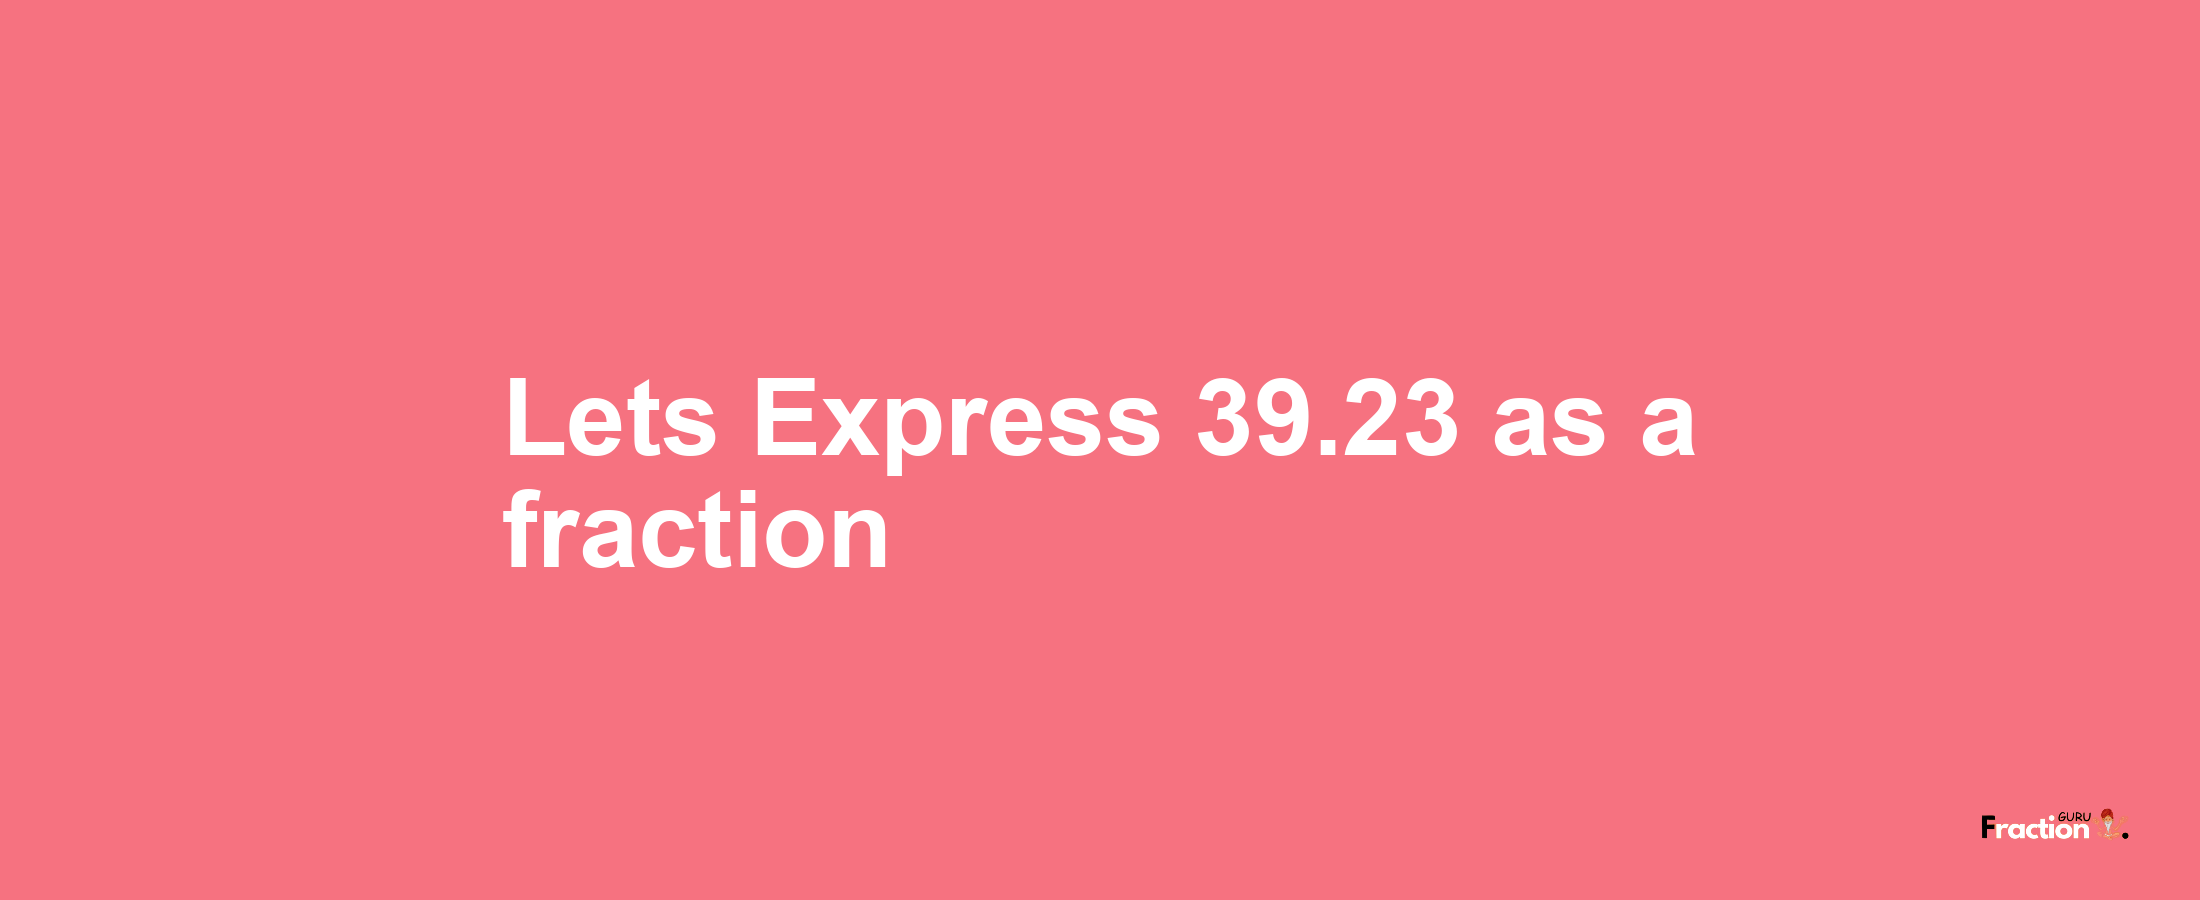 Lets Express 39.23 as afraction